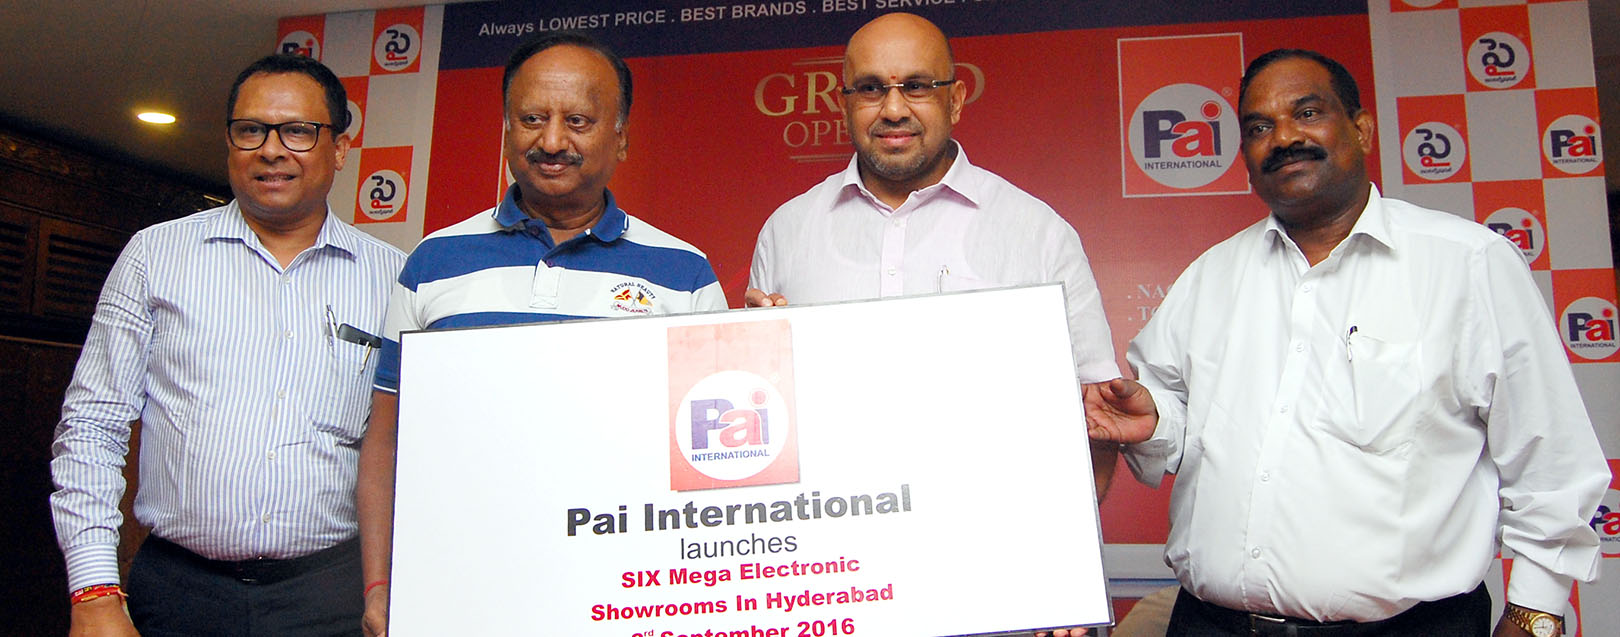 Pai International plans to raise Rs.500 cr fund for expansion